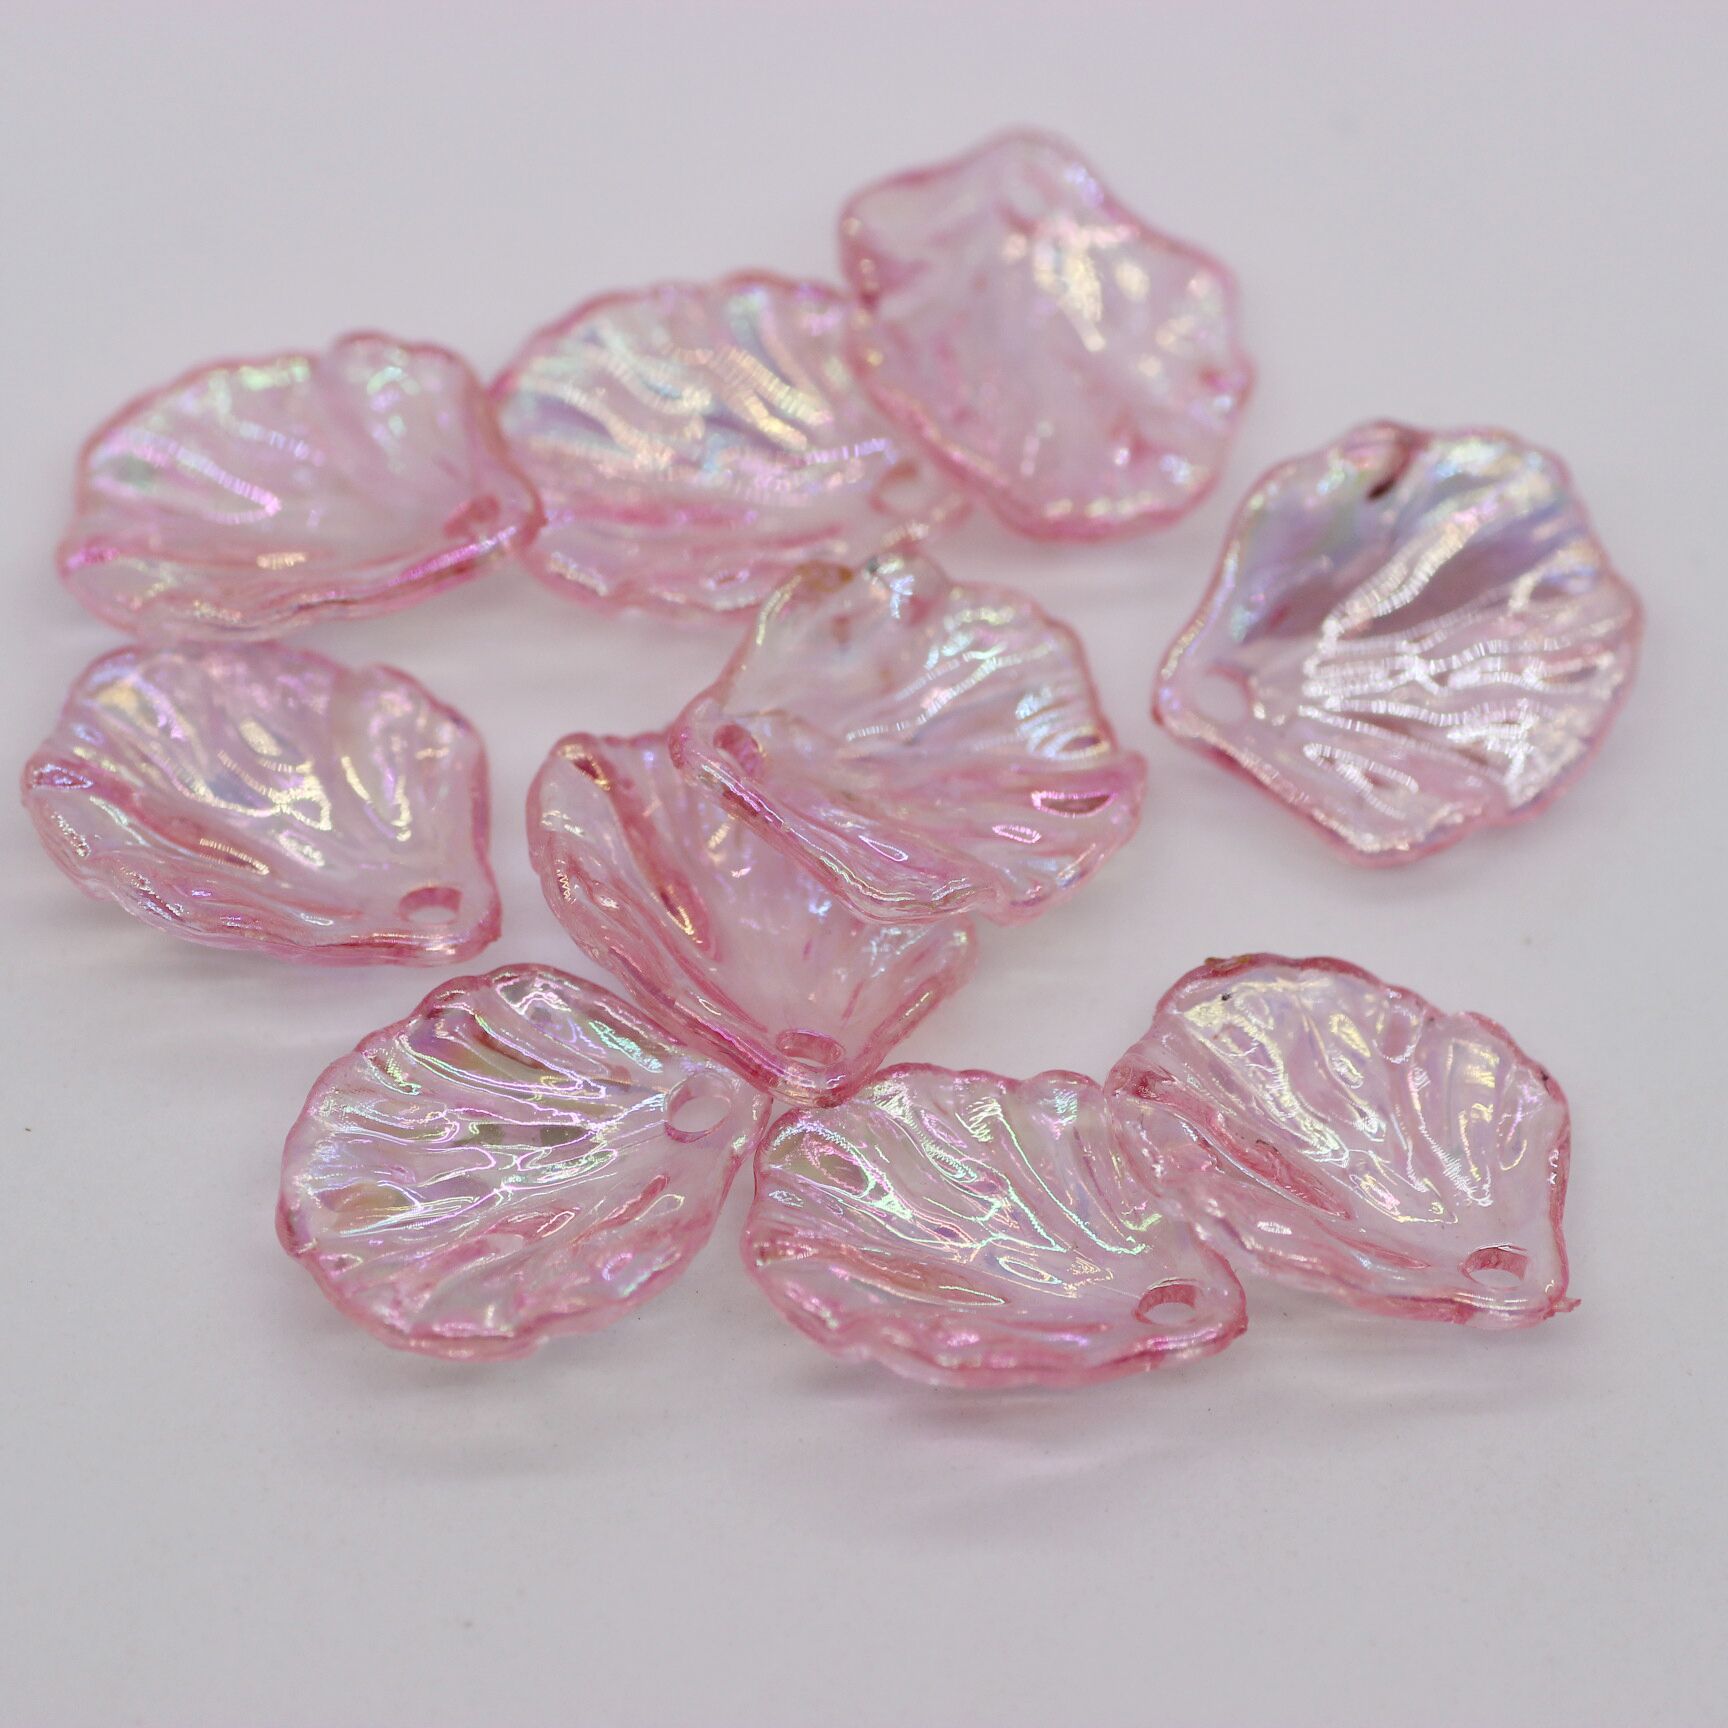 About 18 * 20 mm clear pink